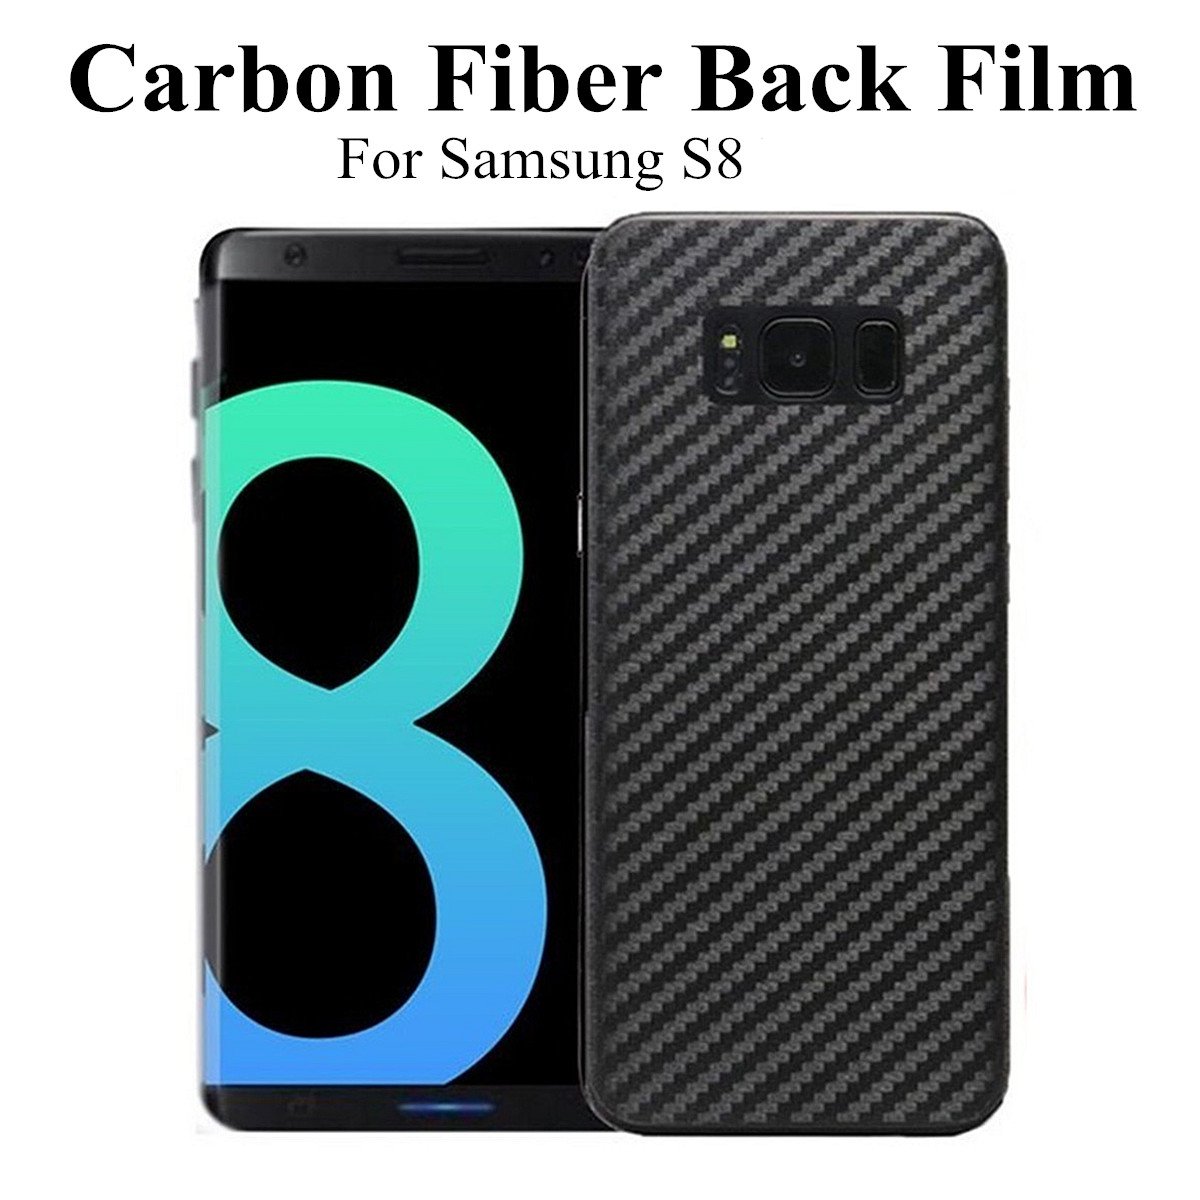 Transparent-Back-Carbon-Fiber-Full-Coverage-Protector-Film-For-Samsung-Galaxy-S8-58-Inch-1148056